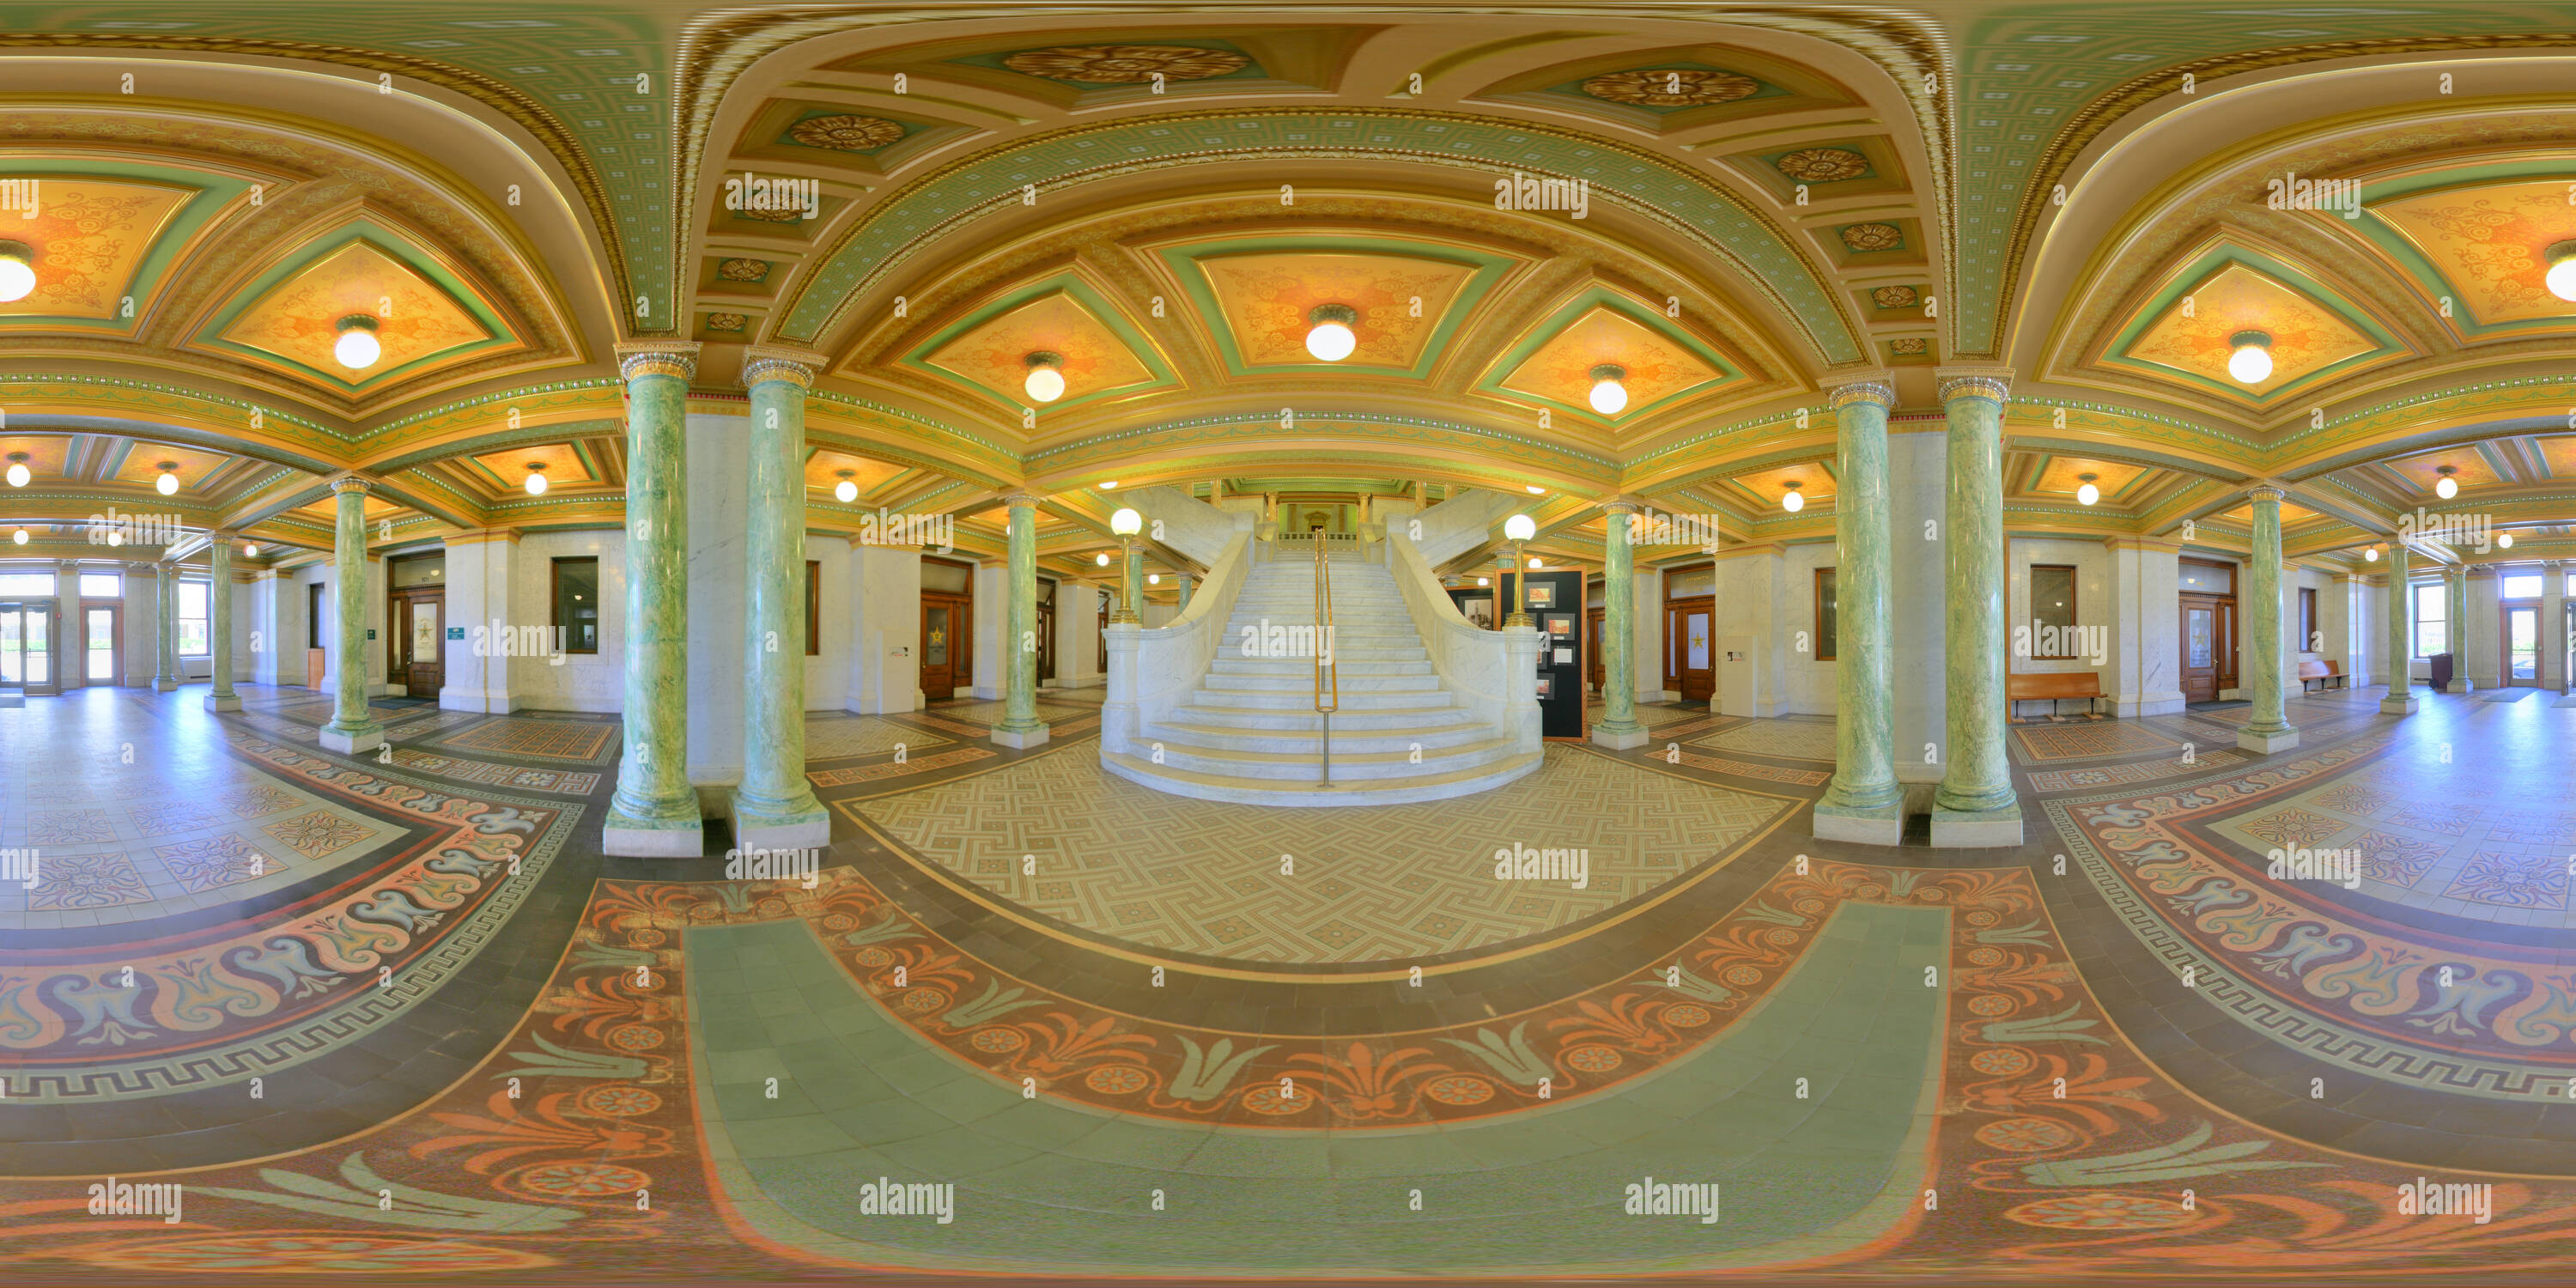 360° view of Allen County Courthouse Fort Wayne Indiana Alamy